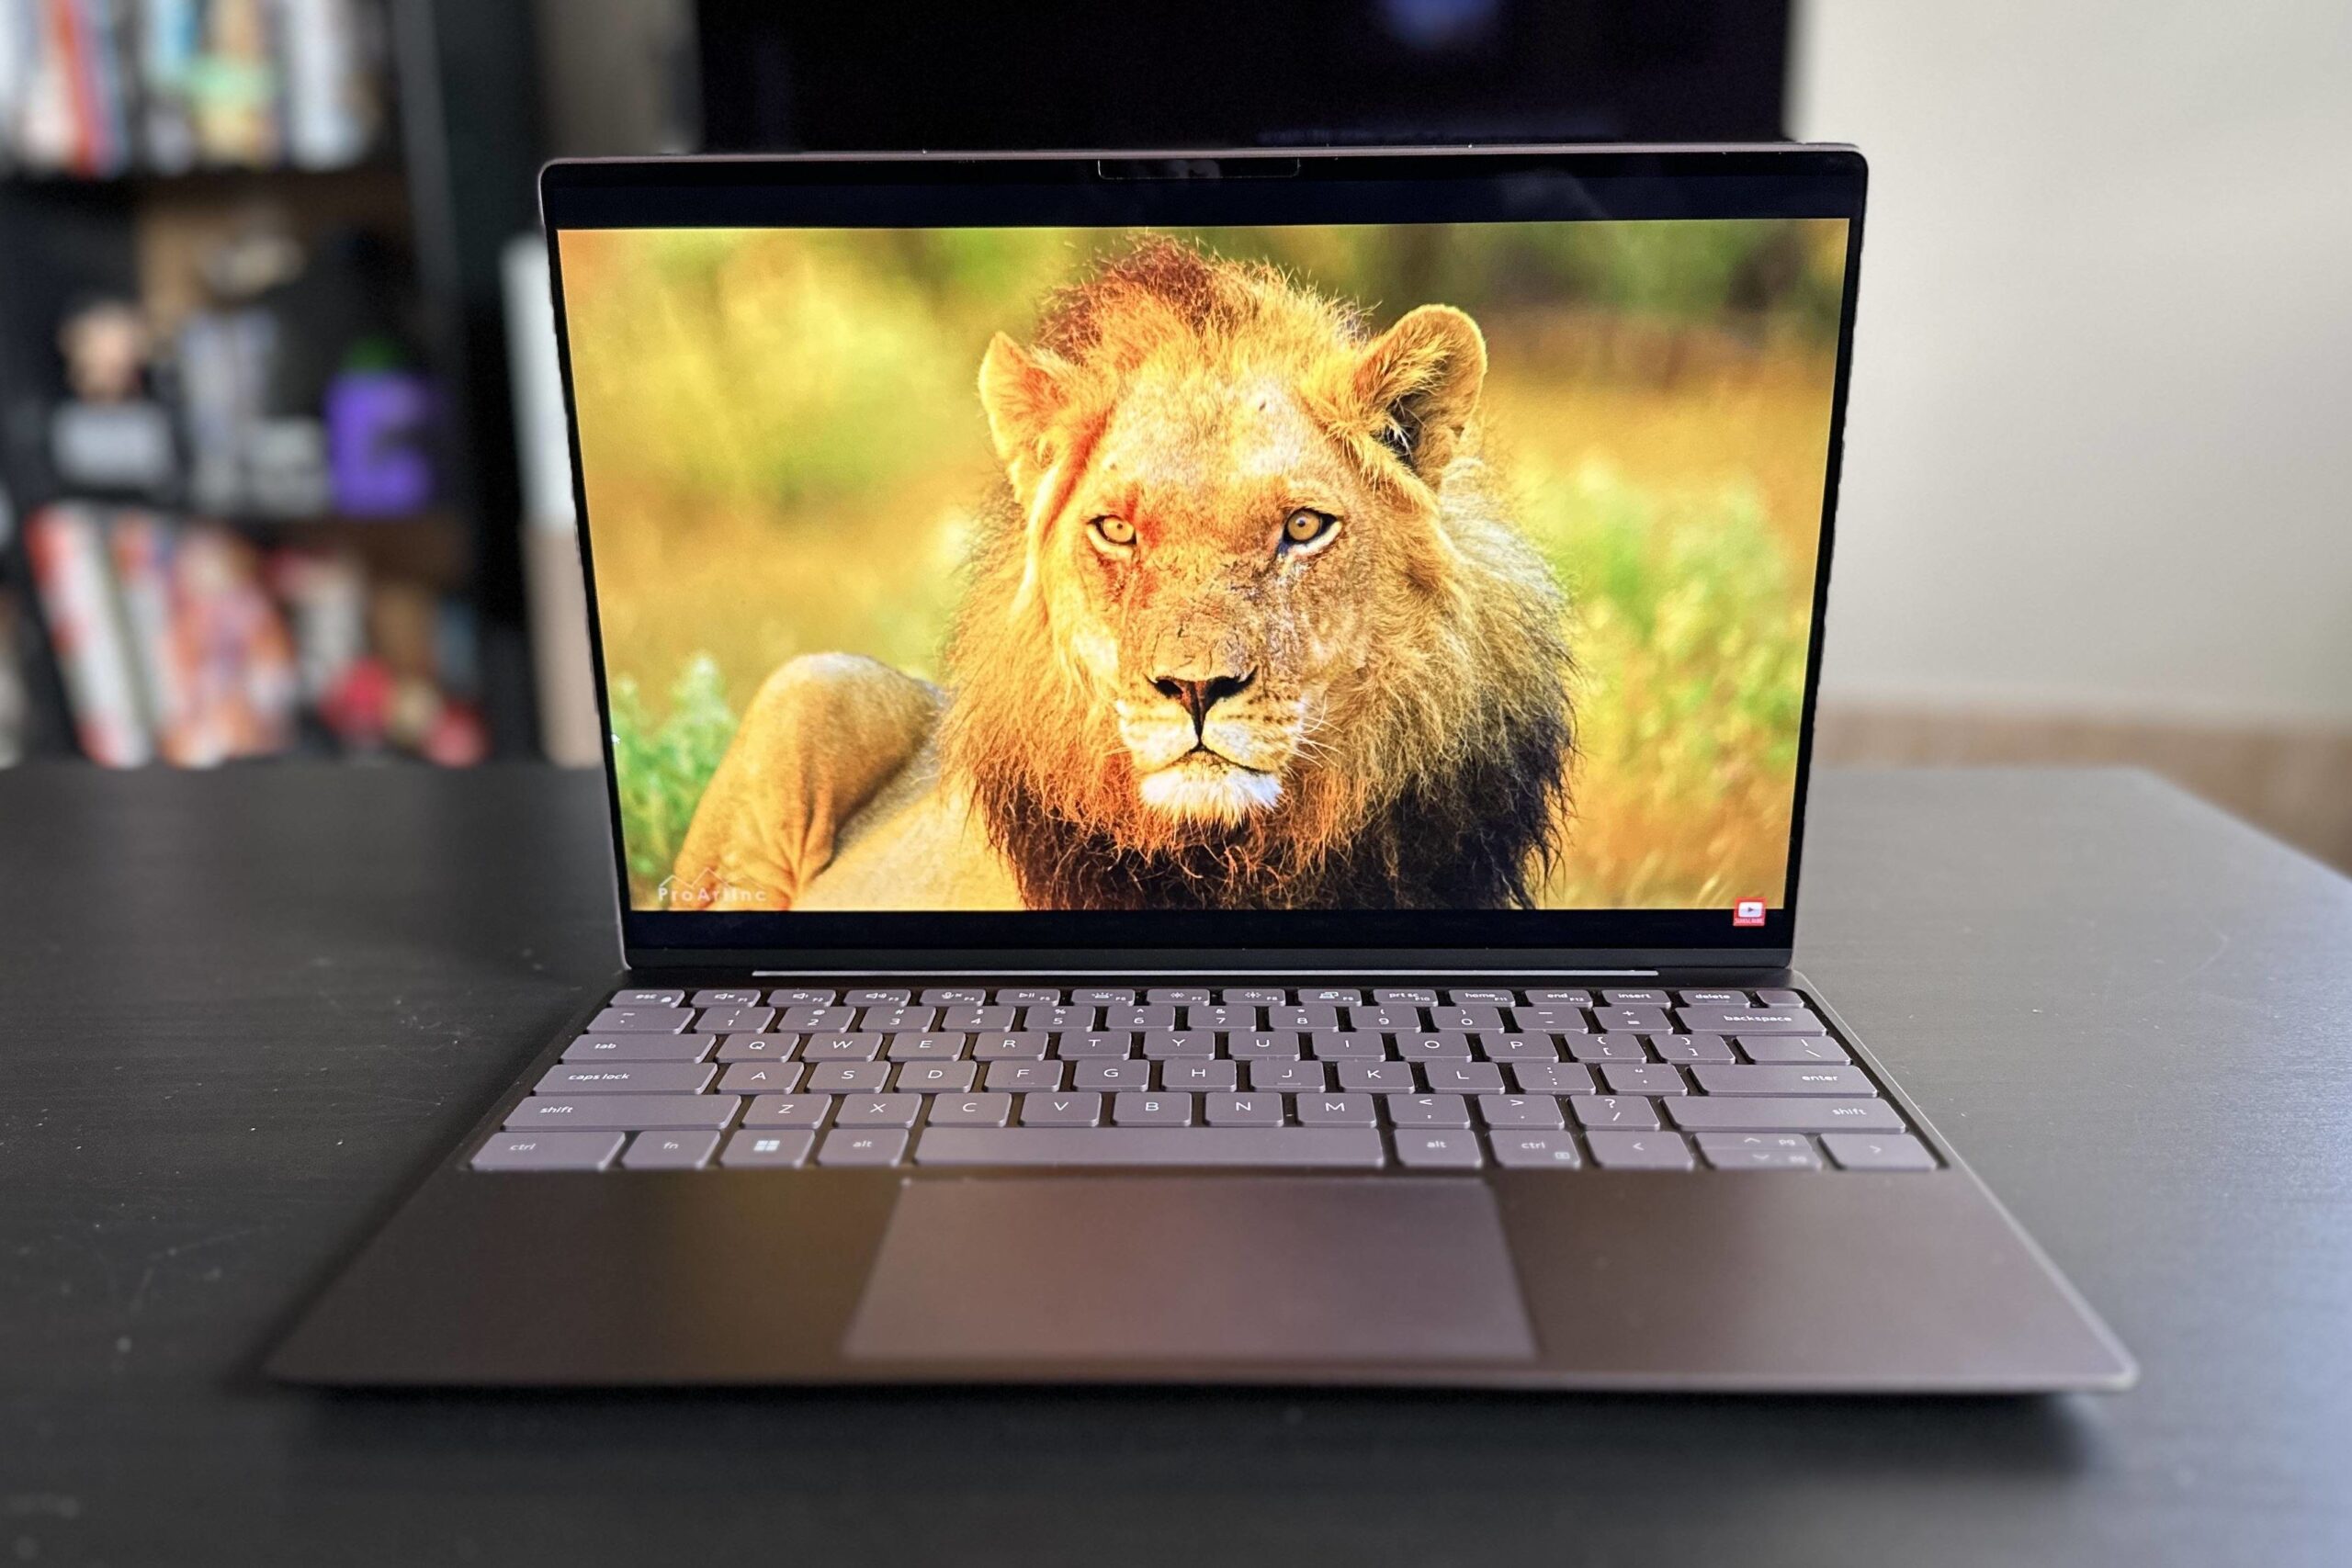 Dell XPS 13 - Guide to Finding the Best Laptop